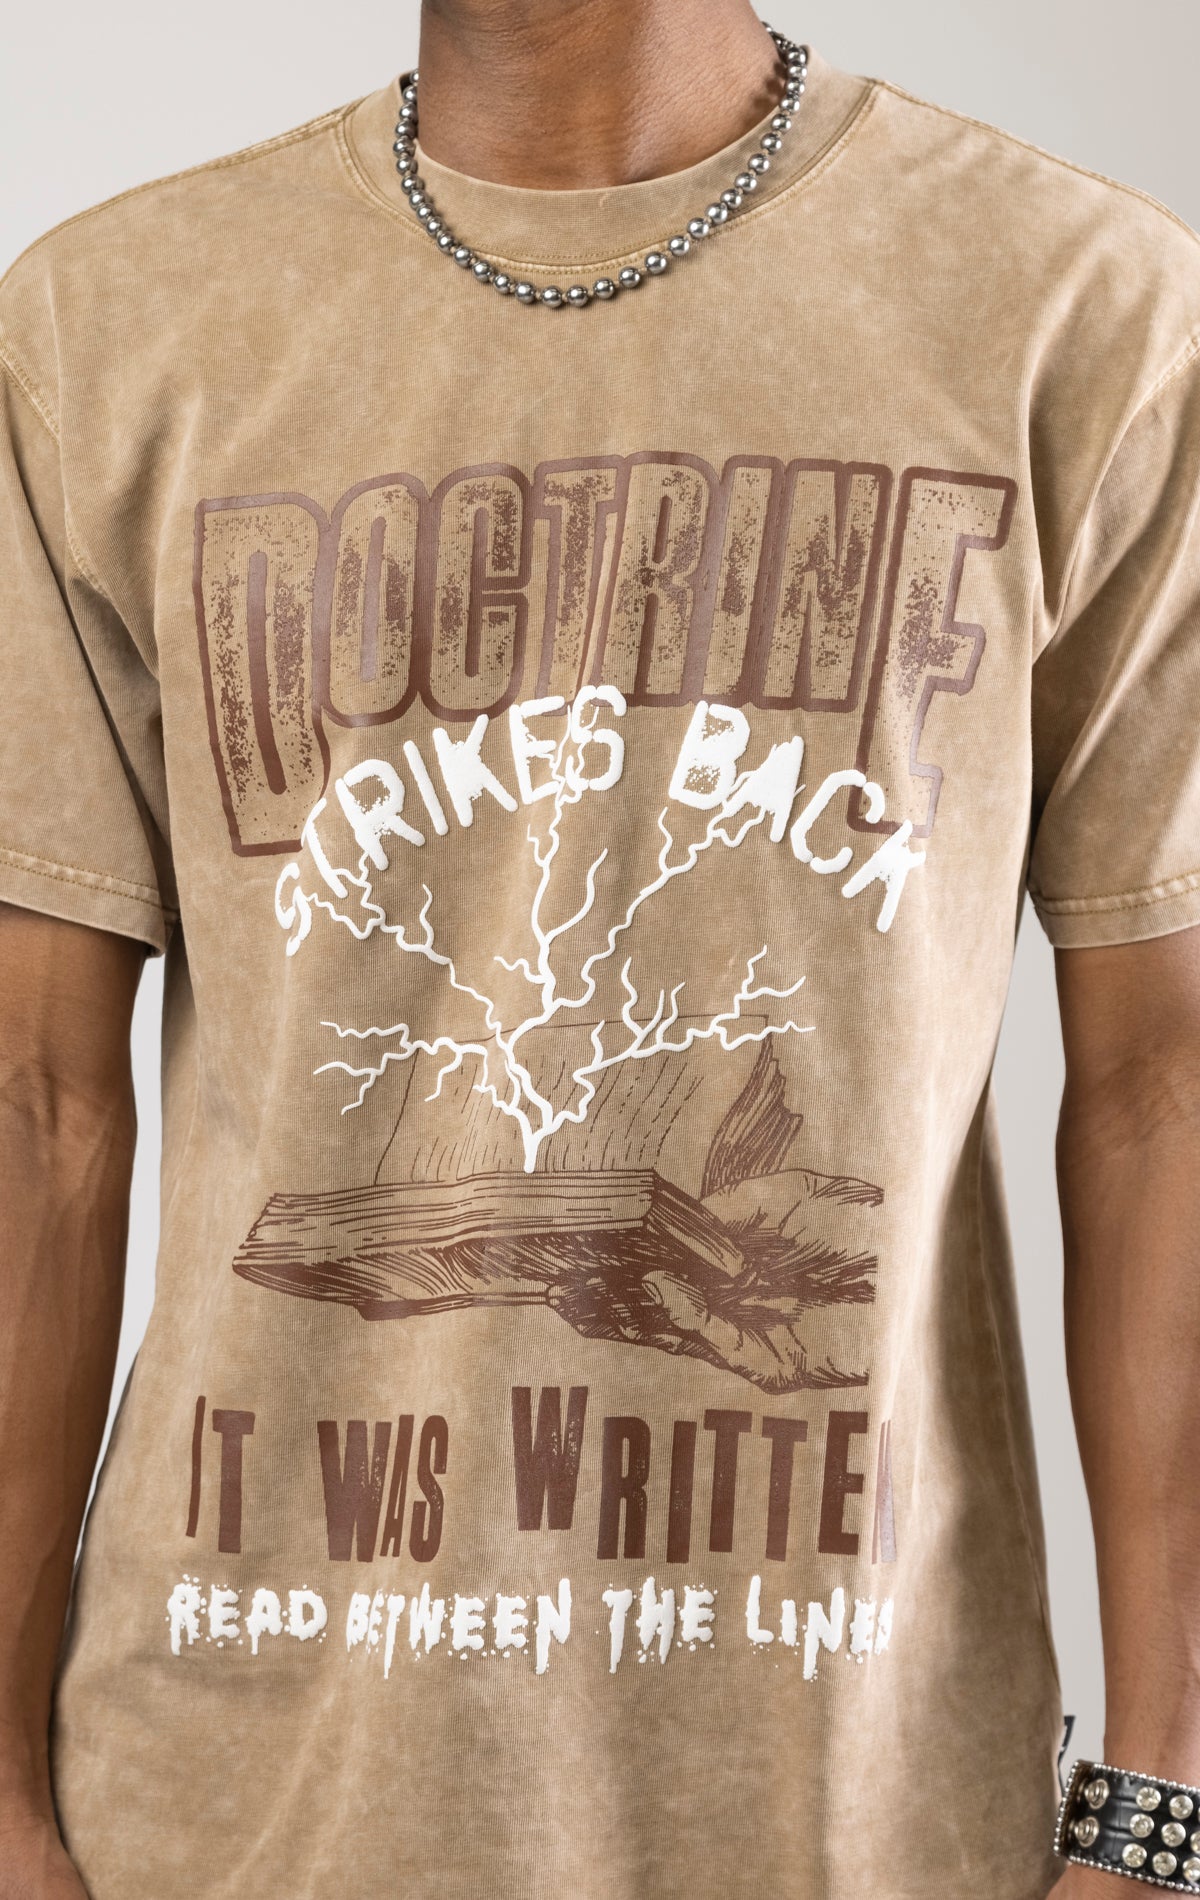 A DOCTRINE STRIKE BACK T-shirt featuring a high-definition digital graphic print across the front. The shirt is made from 100% cotton and has a vintage-washed look.